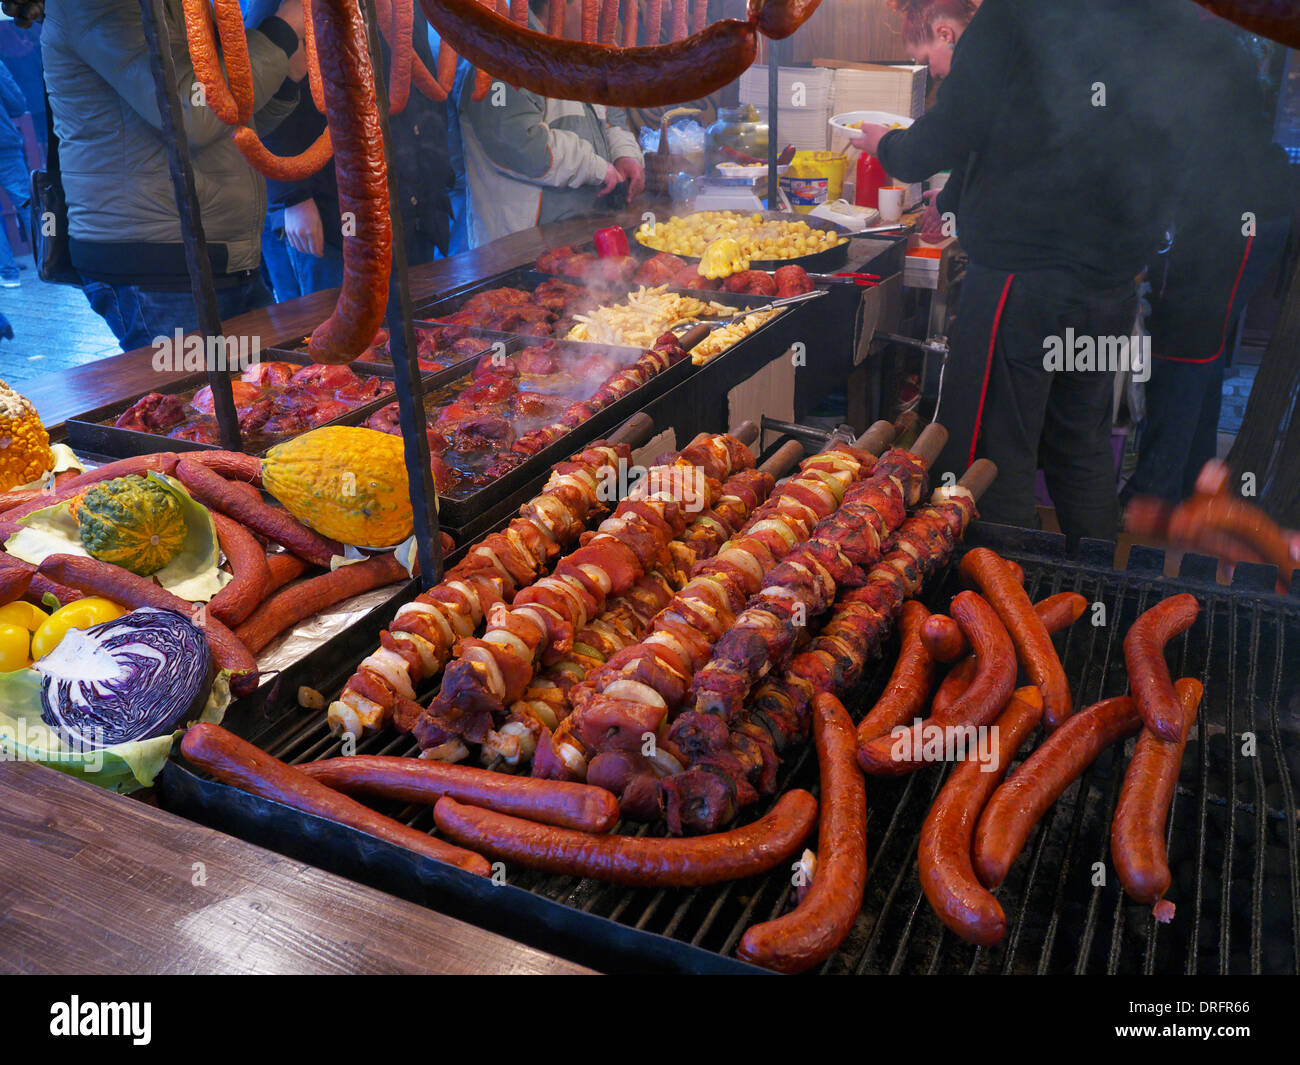 Traditional food stall at the Christmas markets in Krakow, Poland Stock Photo